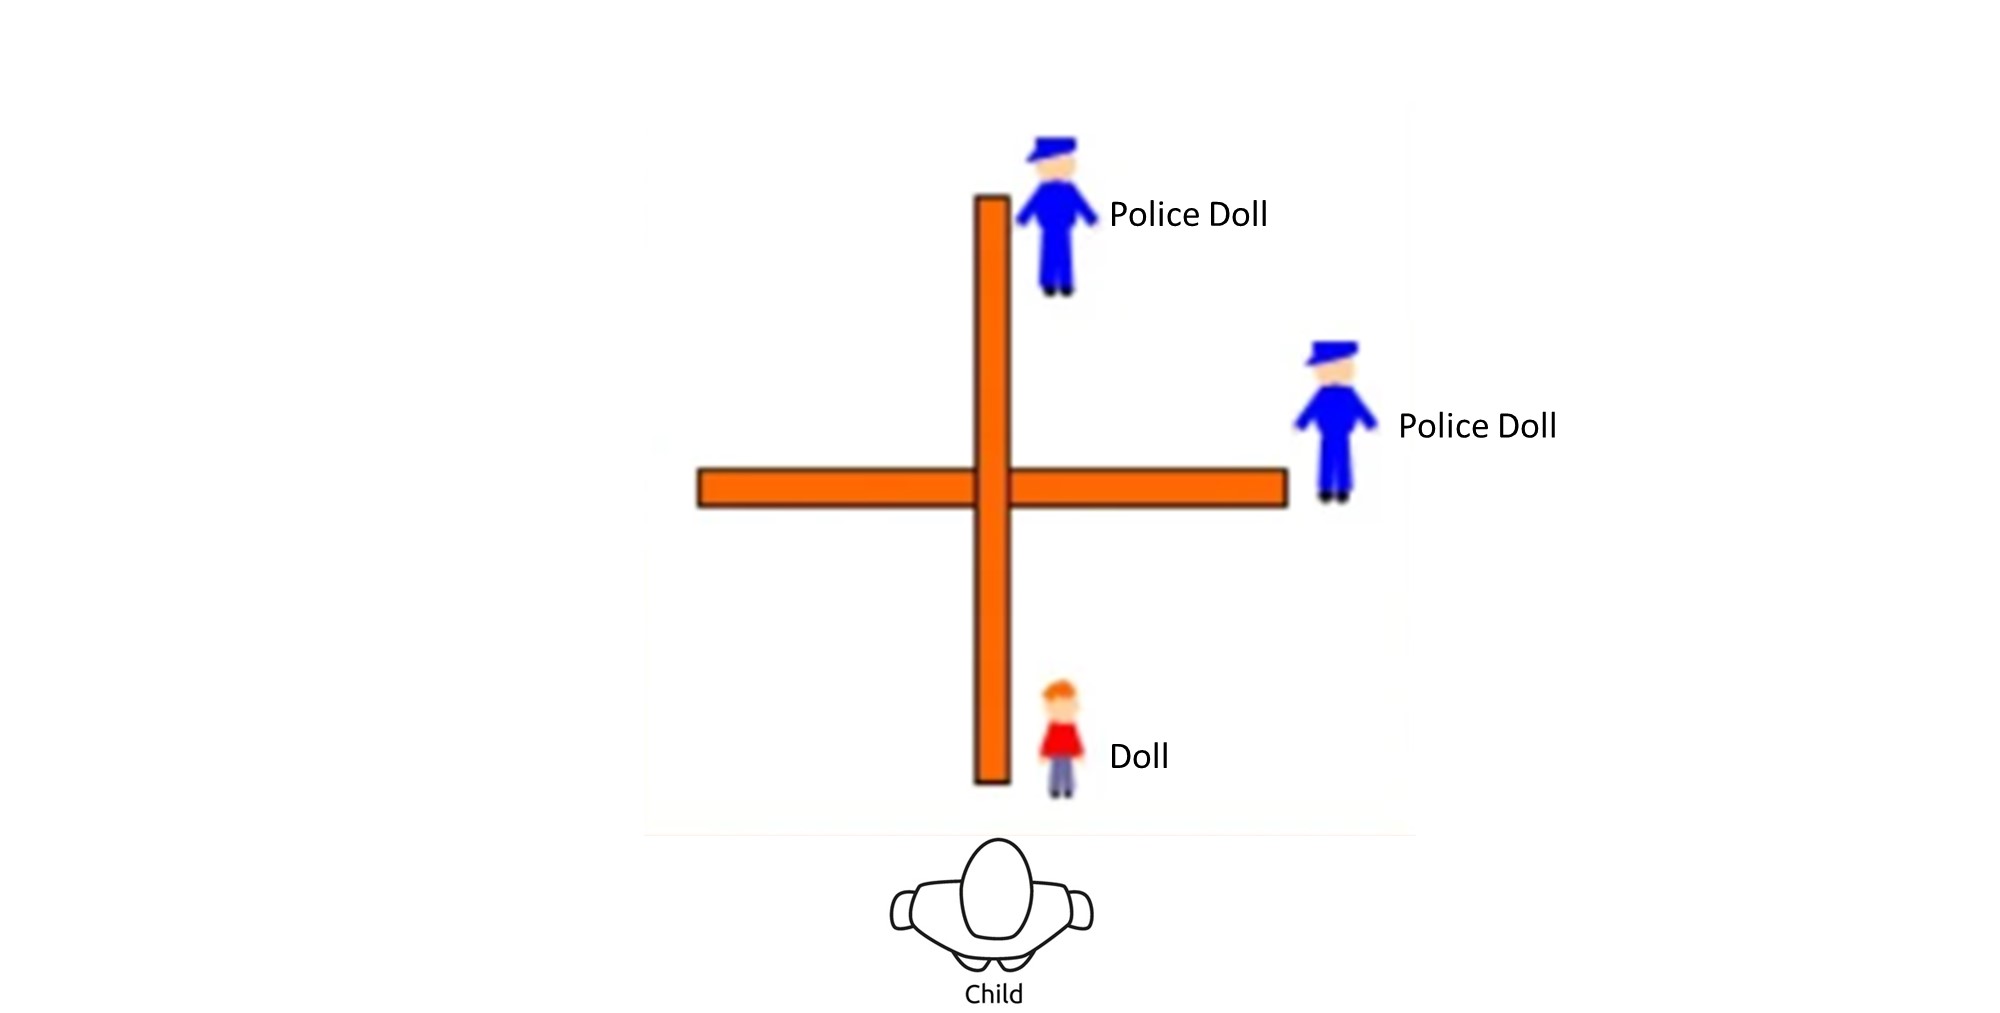 Image of two police dolls positioned at the top and right-hand side of of 4 walls. A toy doll is positioned at the bottome corner of the walls, with a child looking from above.